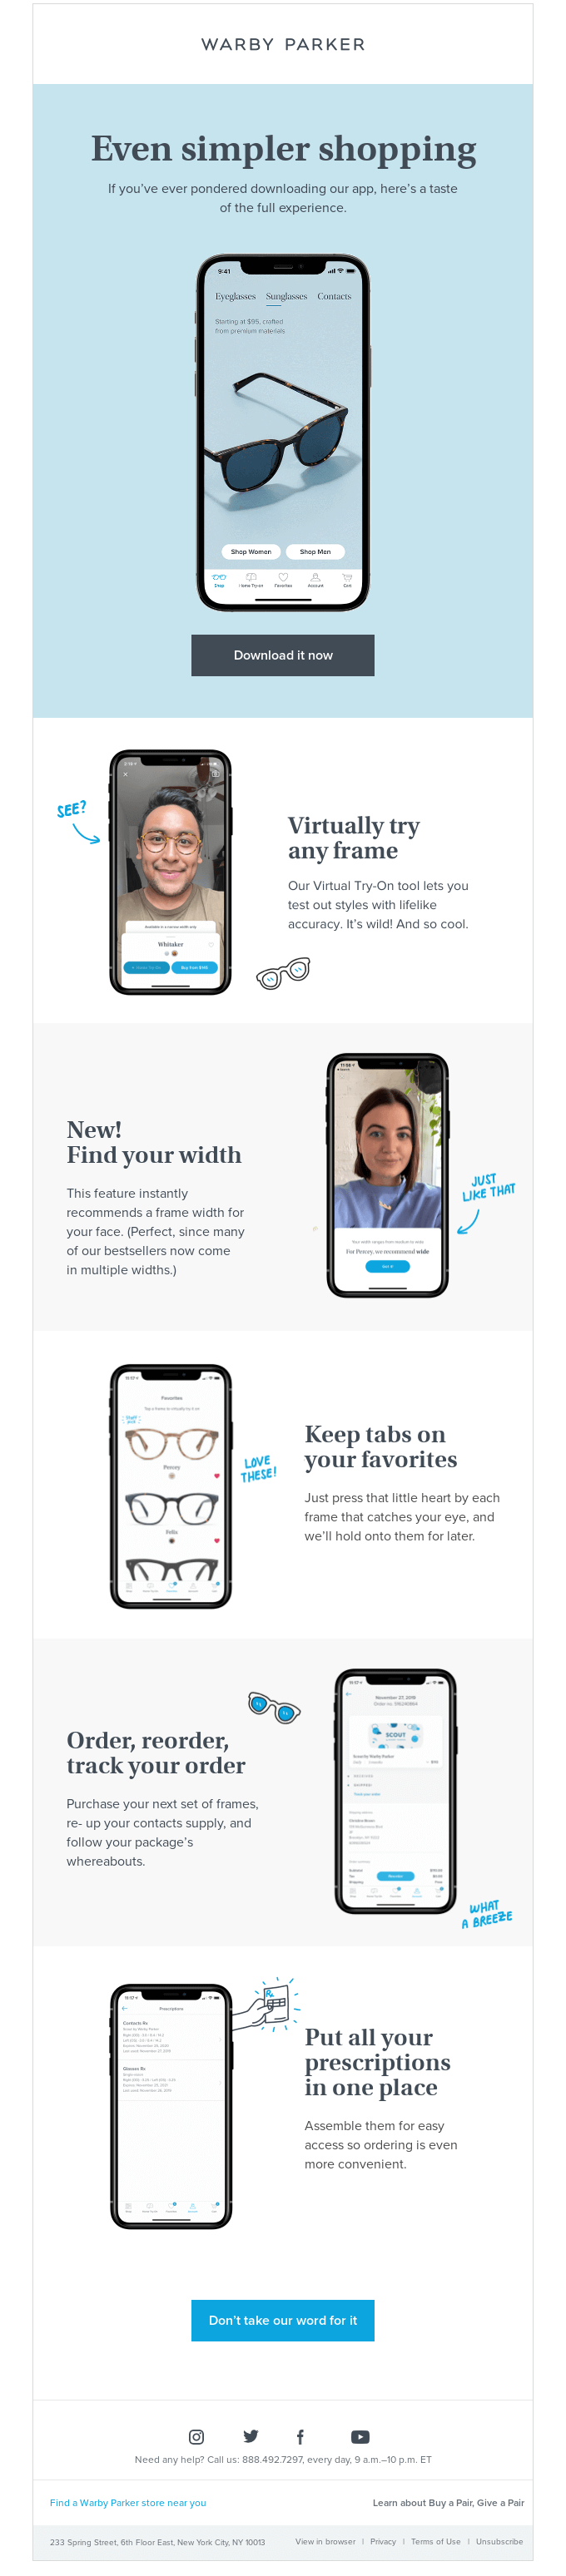 Warby Parker email that demonstrates the value of downloading their mobile app.